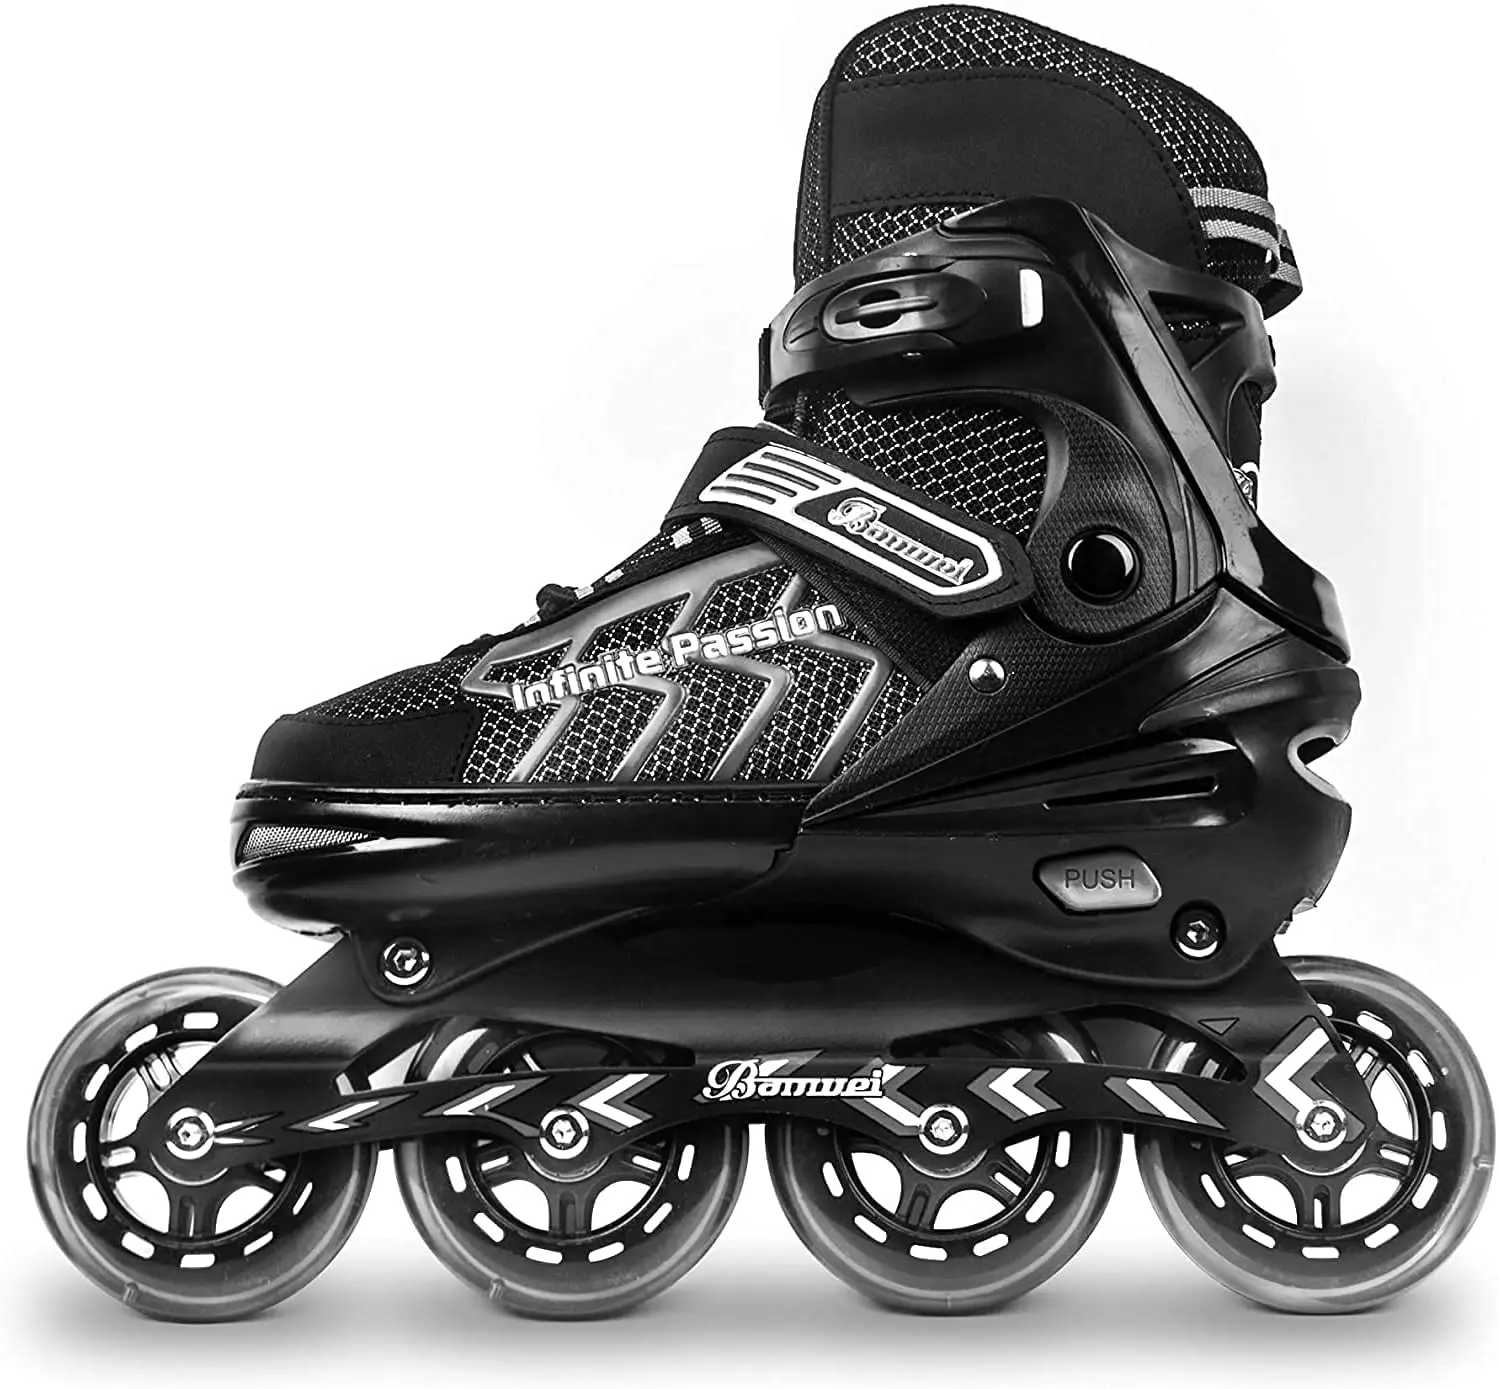 Nattork Adjustable Inline Skates for Adults and Teen, Safe and Durable Roller Skates with Giant Wheels,High Performance Skates